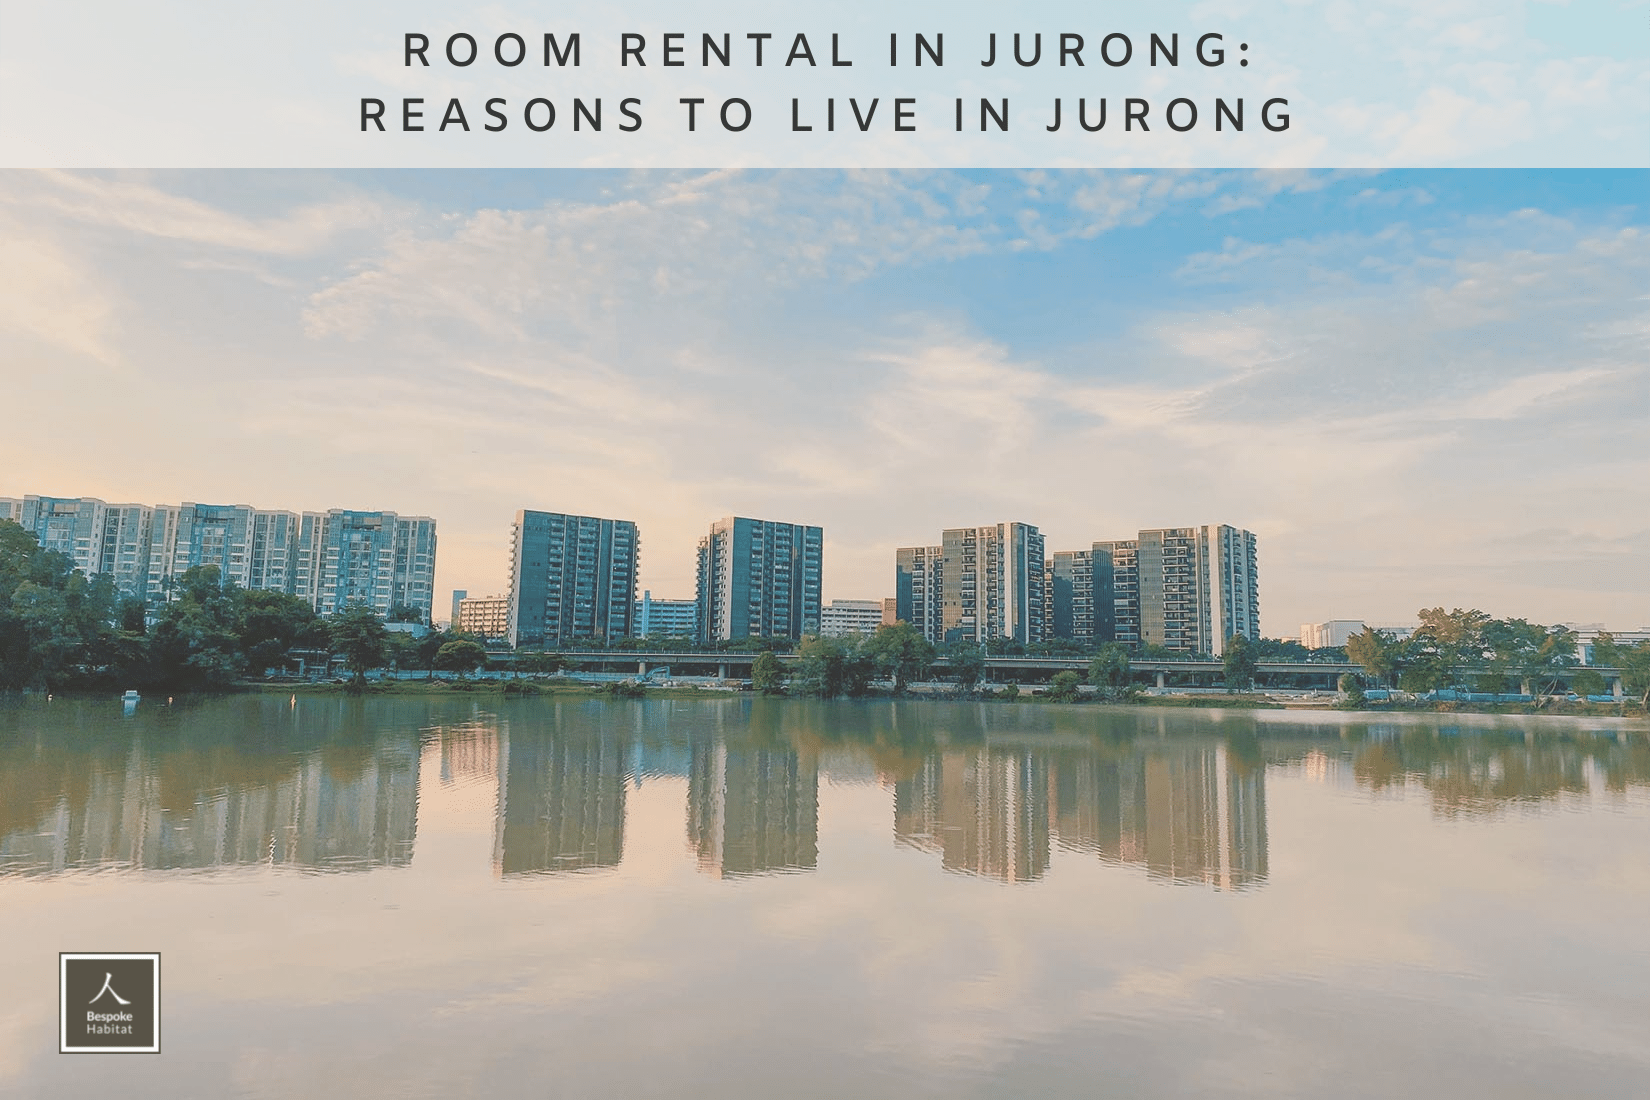 Room rental in Jurong: Reasons to live in Jurong